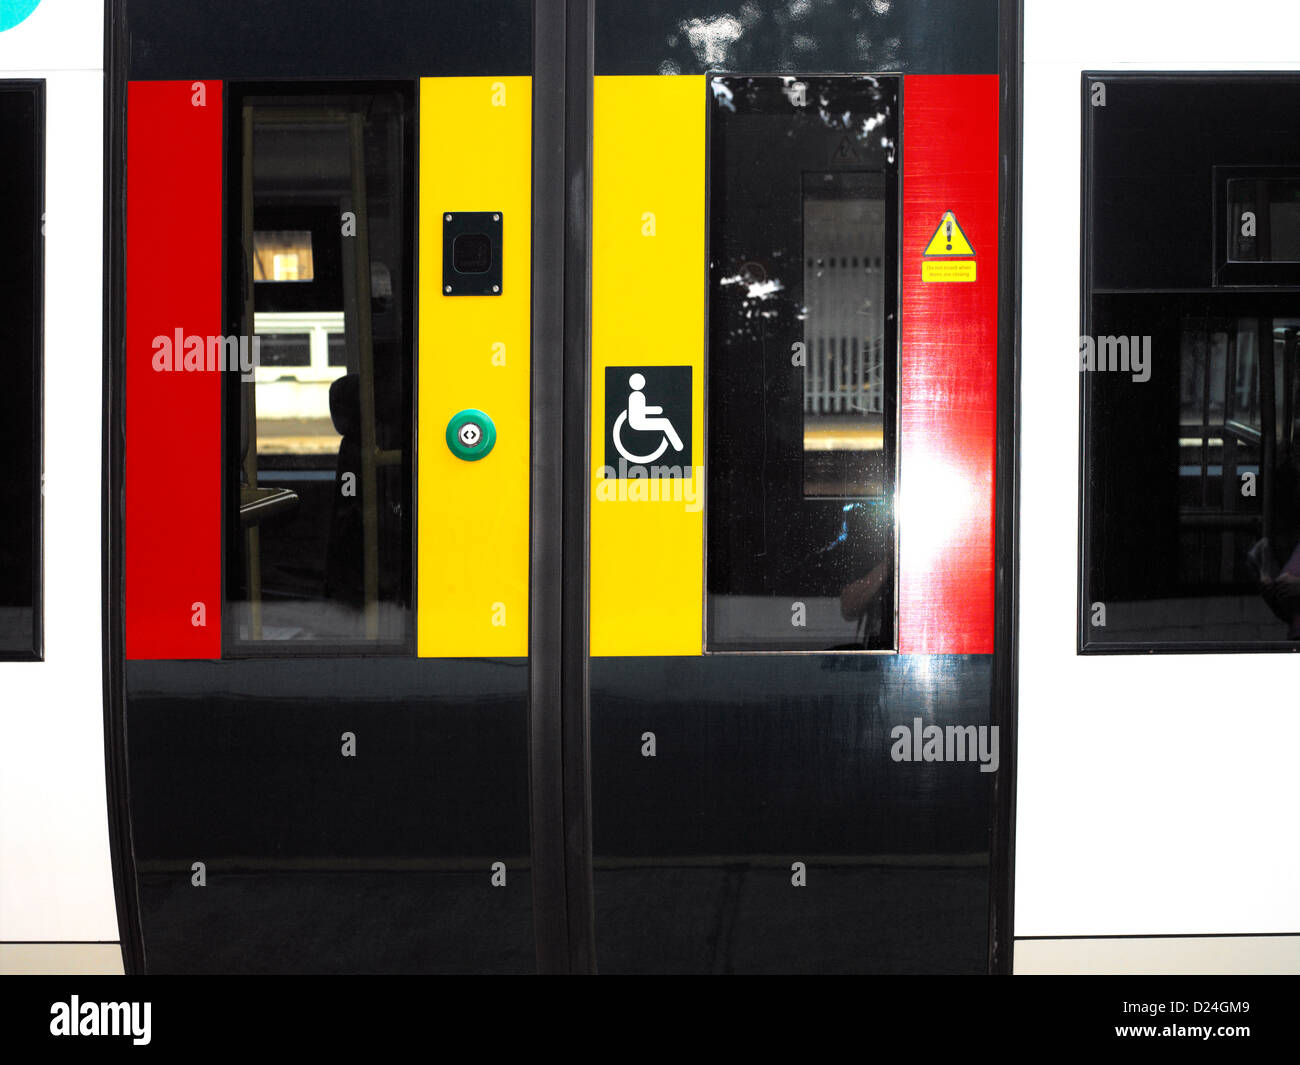 Disabled Door sign on Commuter Train in London England Stock Photo